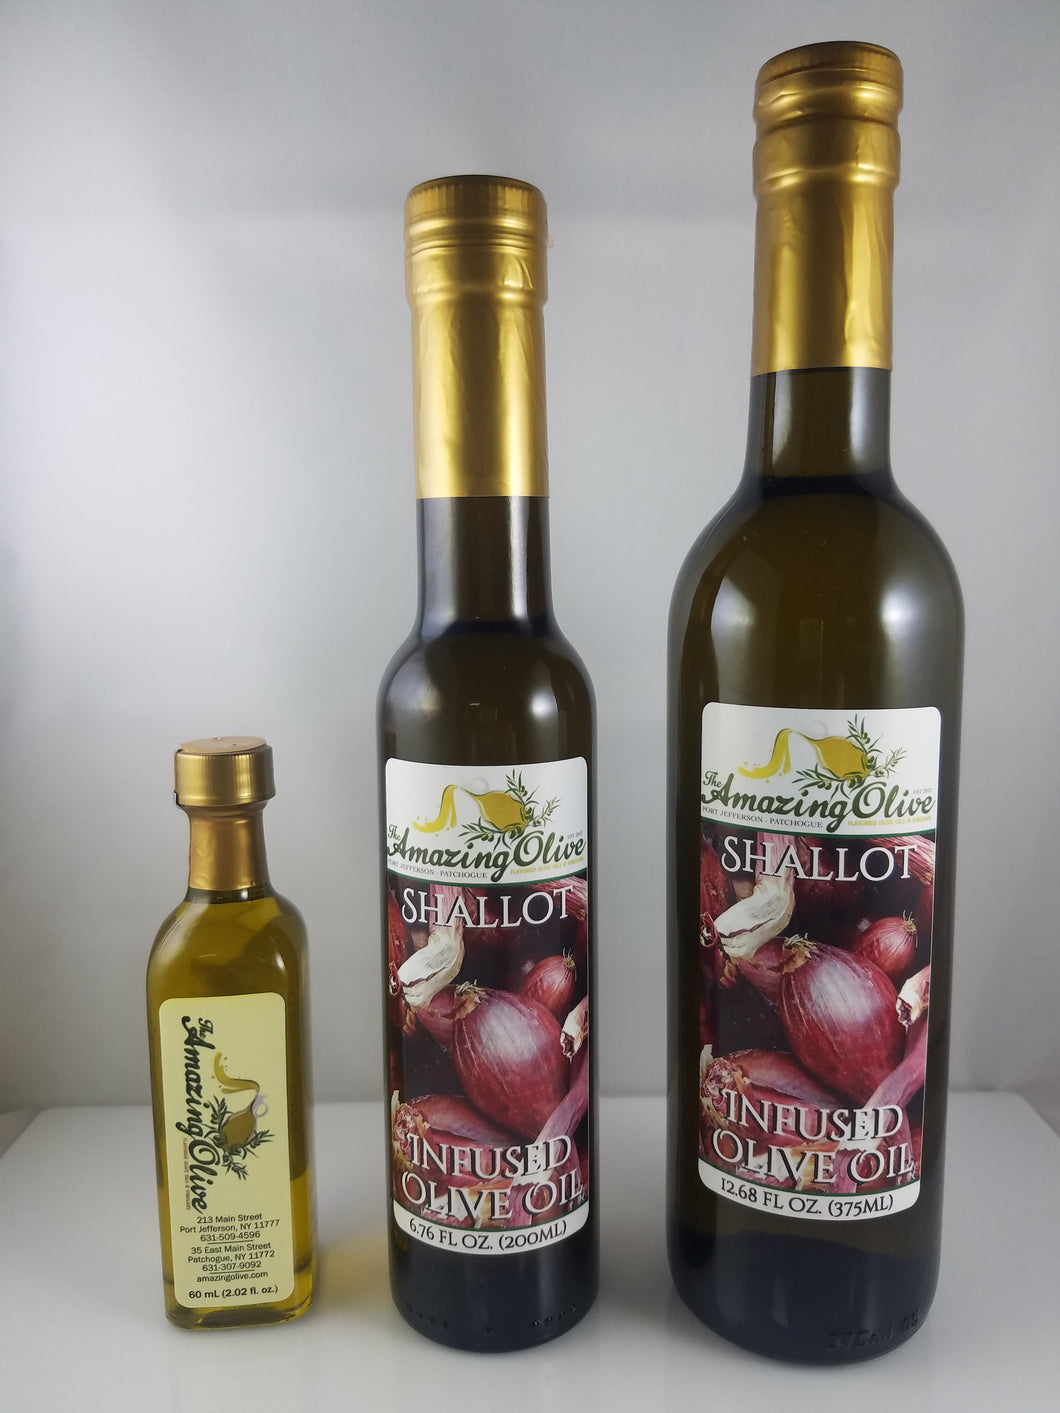 Shallot Infused Olive Oil